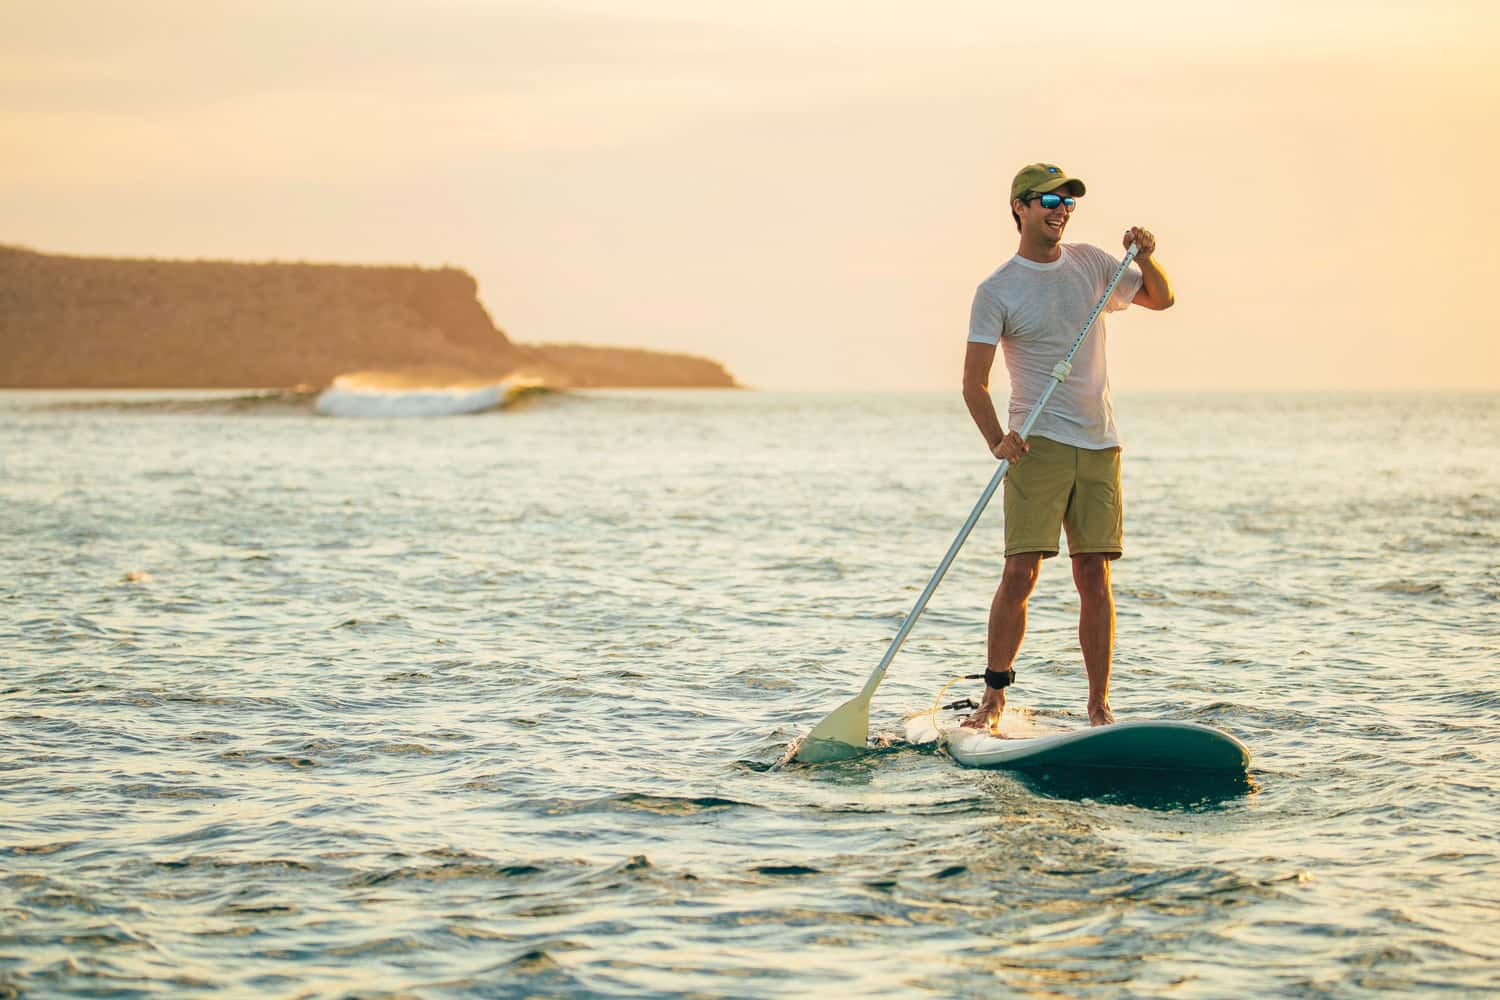 Guests can try SUP (Stand Up Paddleboard) on Lindblad Expeditions-National Geographic's 3- and 4-day sailings in the Sea of Cortez.